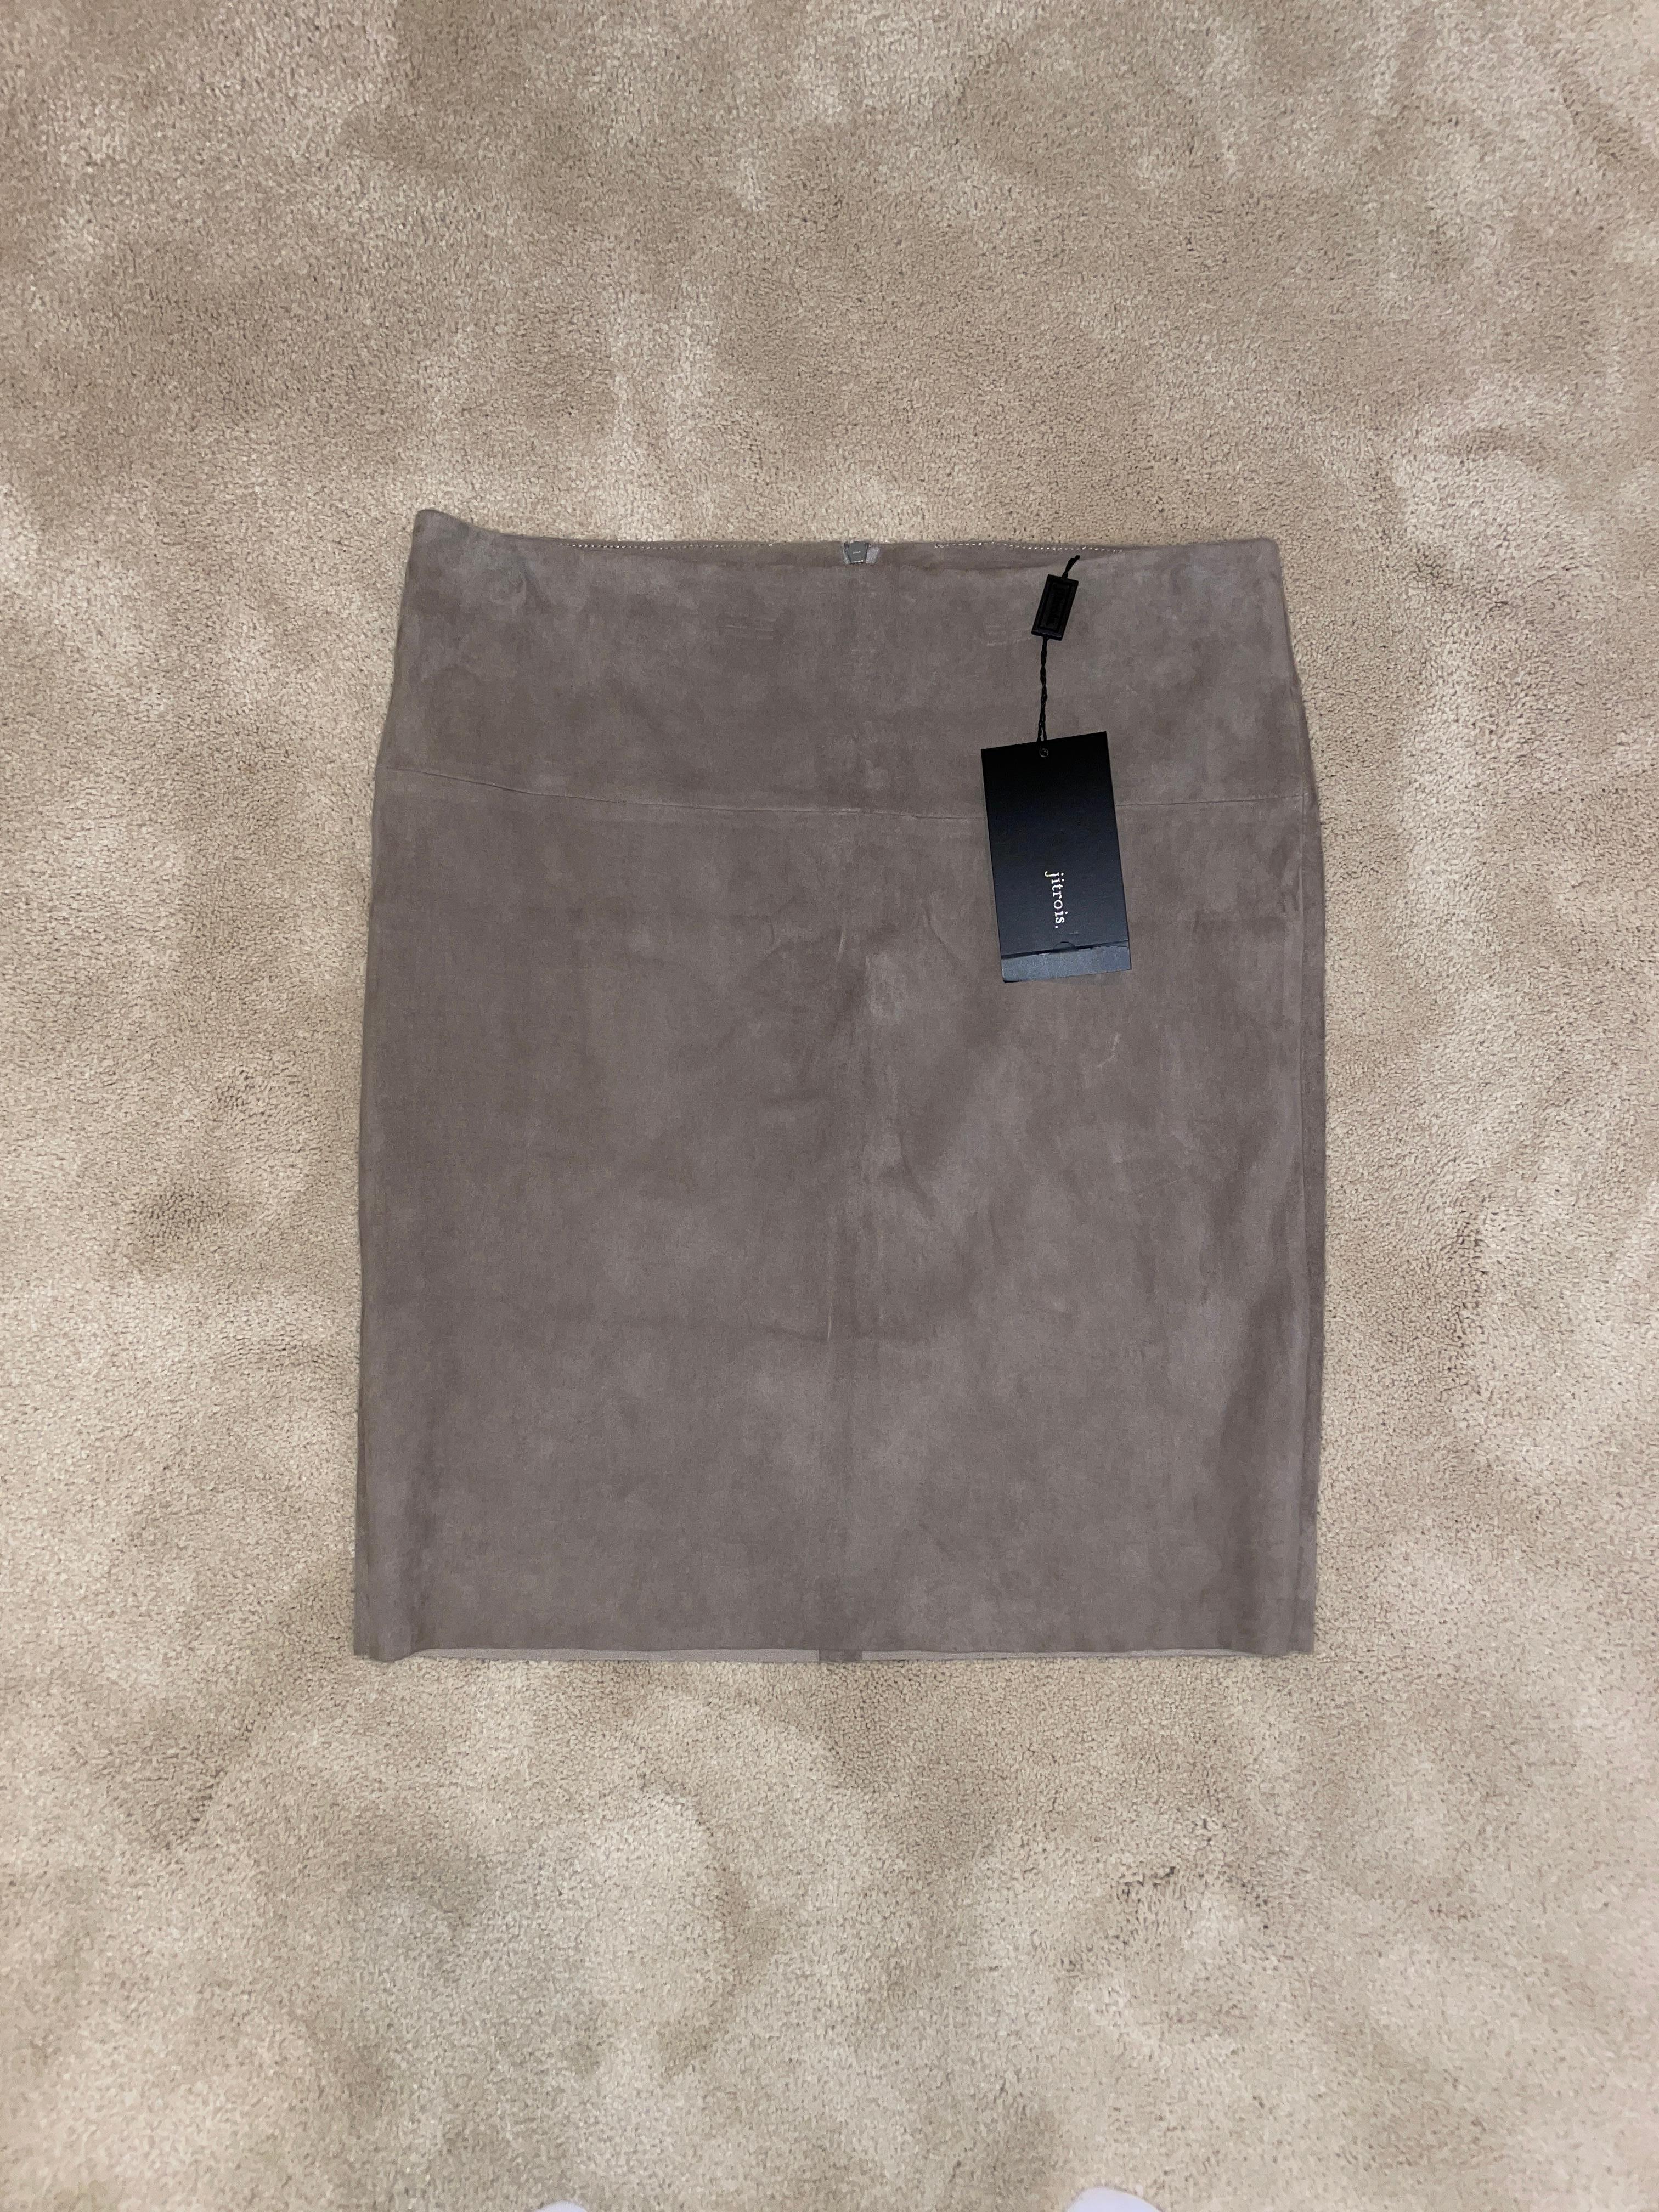 NWT's Jitrois tan beige pencil stretch suede skirt. Super comfy, no flaws, lightweight. F40, Measurements laying flat in inches: waist 15, hips 17, length 18.5 ... the 15 waist cannot stretch but the rest of the skirt can stretch by 1